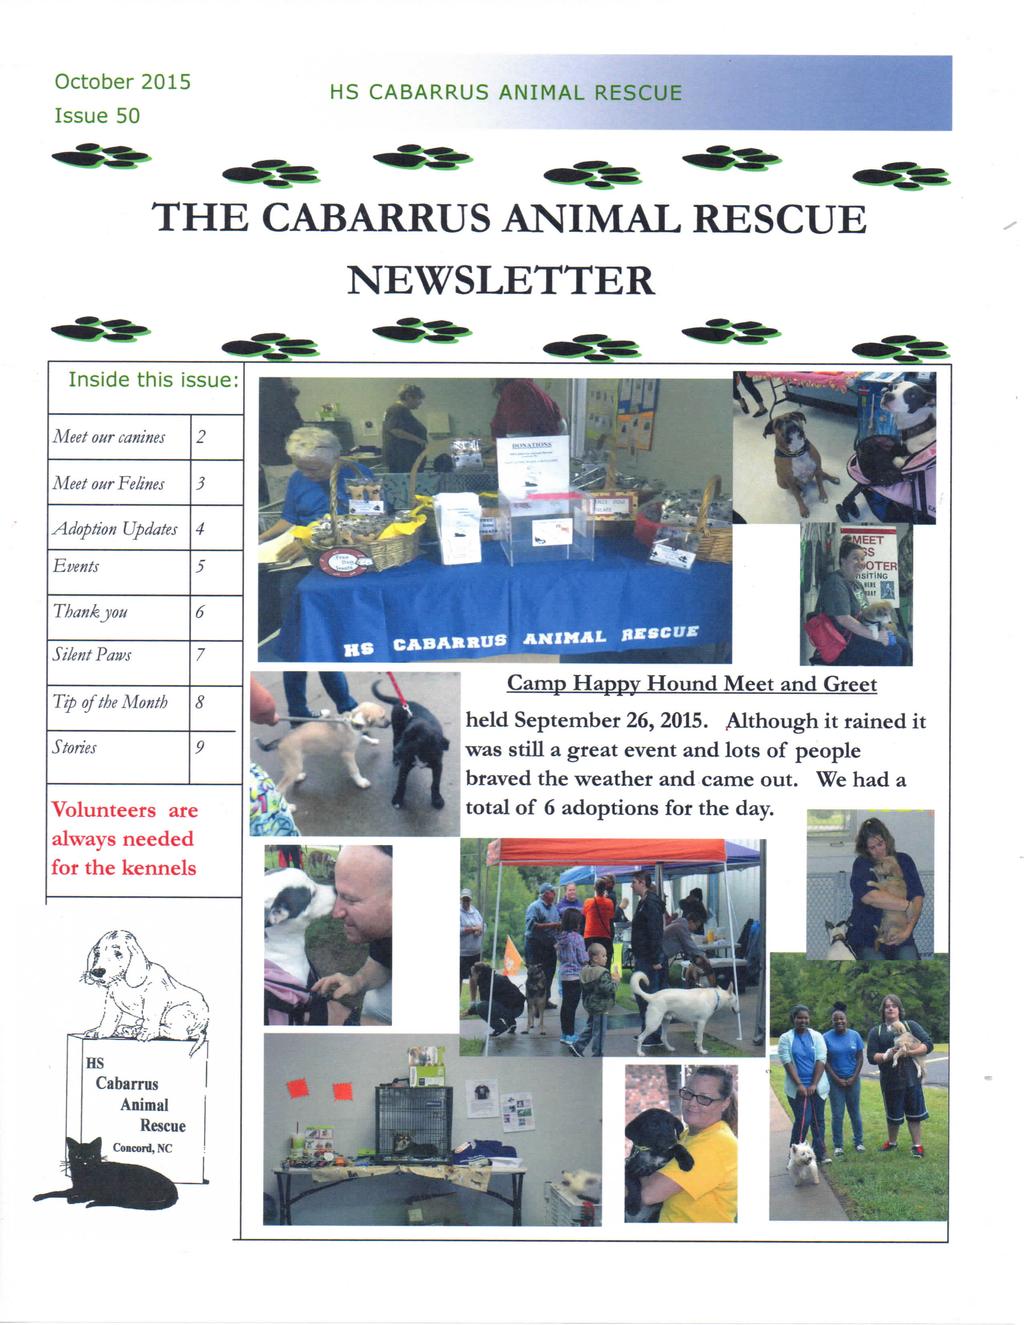 October 2015 Issue 50 HS CABARRUS ANIMAL RESCUE THE CABARRUS ANIMAL RESCUE NEWSLETTER Inside this issue: Meet our canines 2 Meet our Felines 3 Adoption Updates 4 Events 5 Thankjou 6 Silent Paws 7 Tip